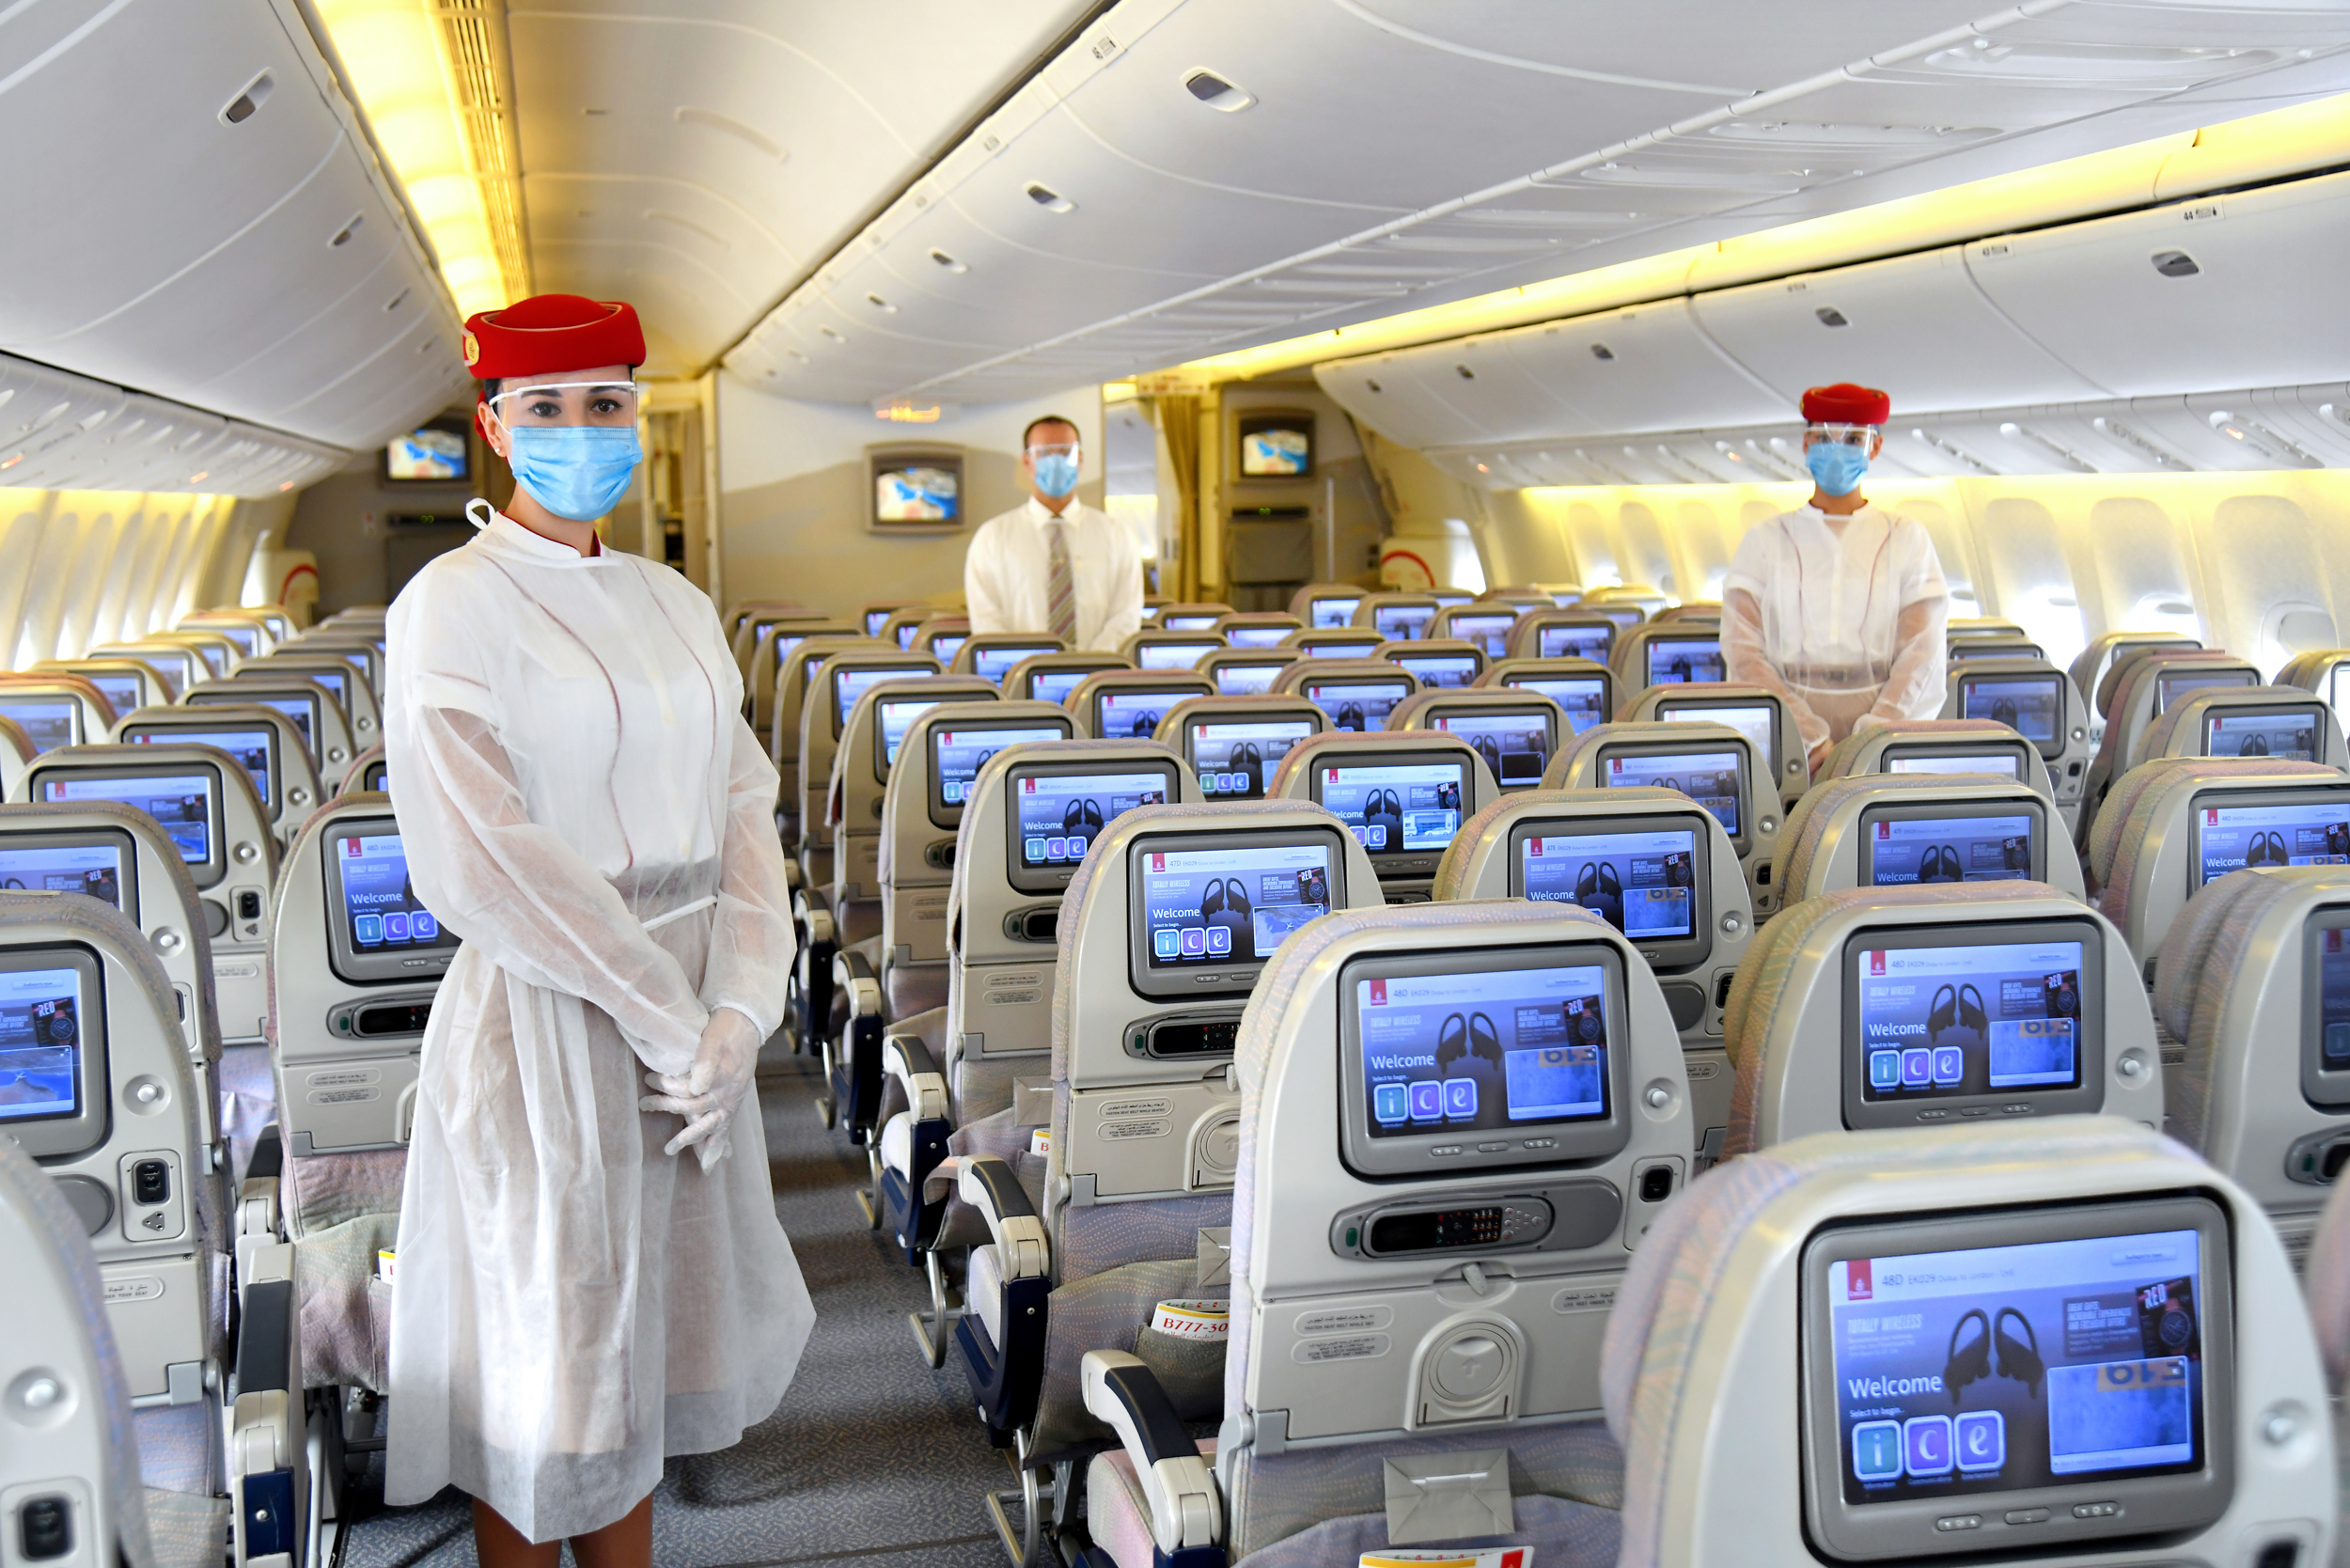 Emirates crew to don PPE to protect against Covid19